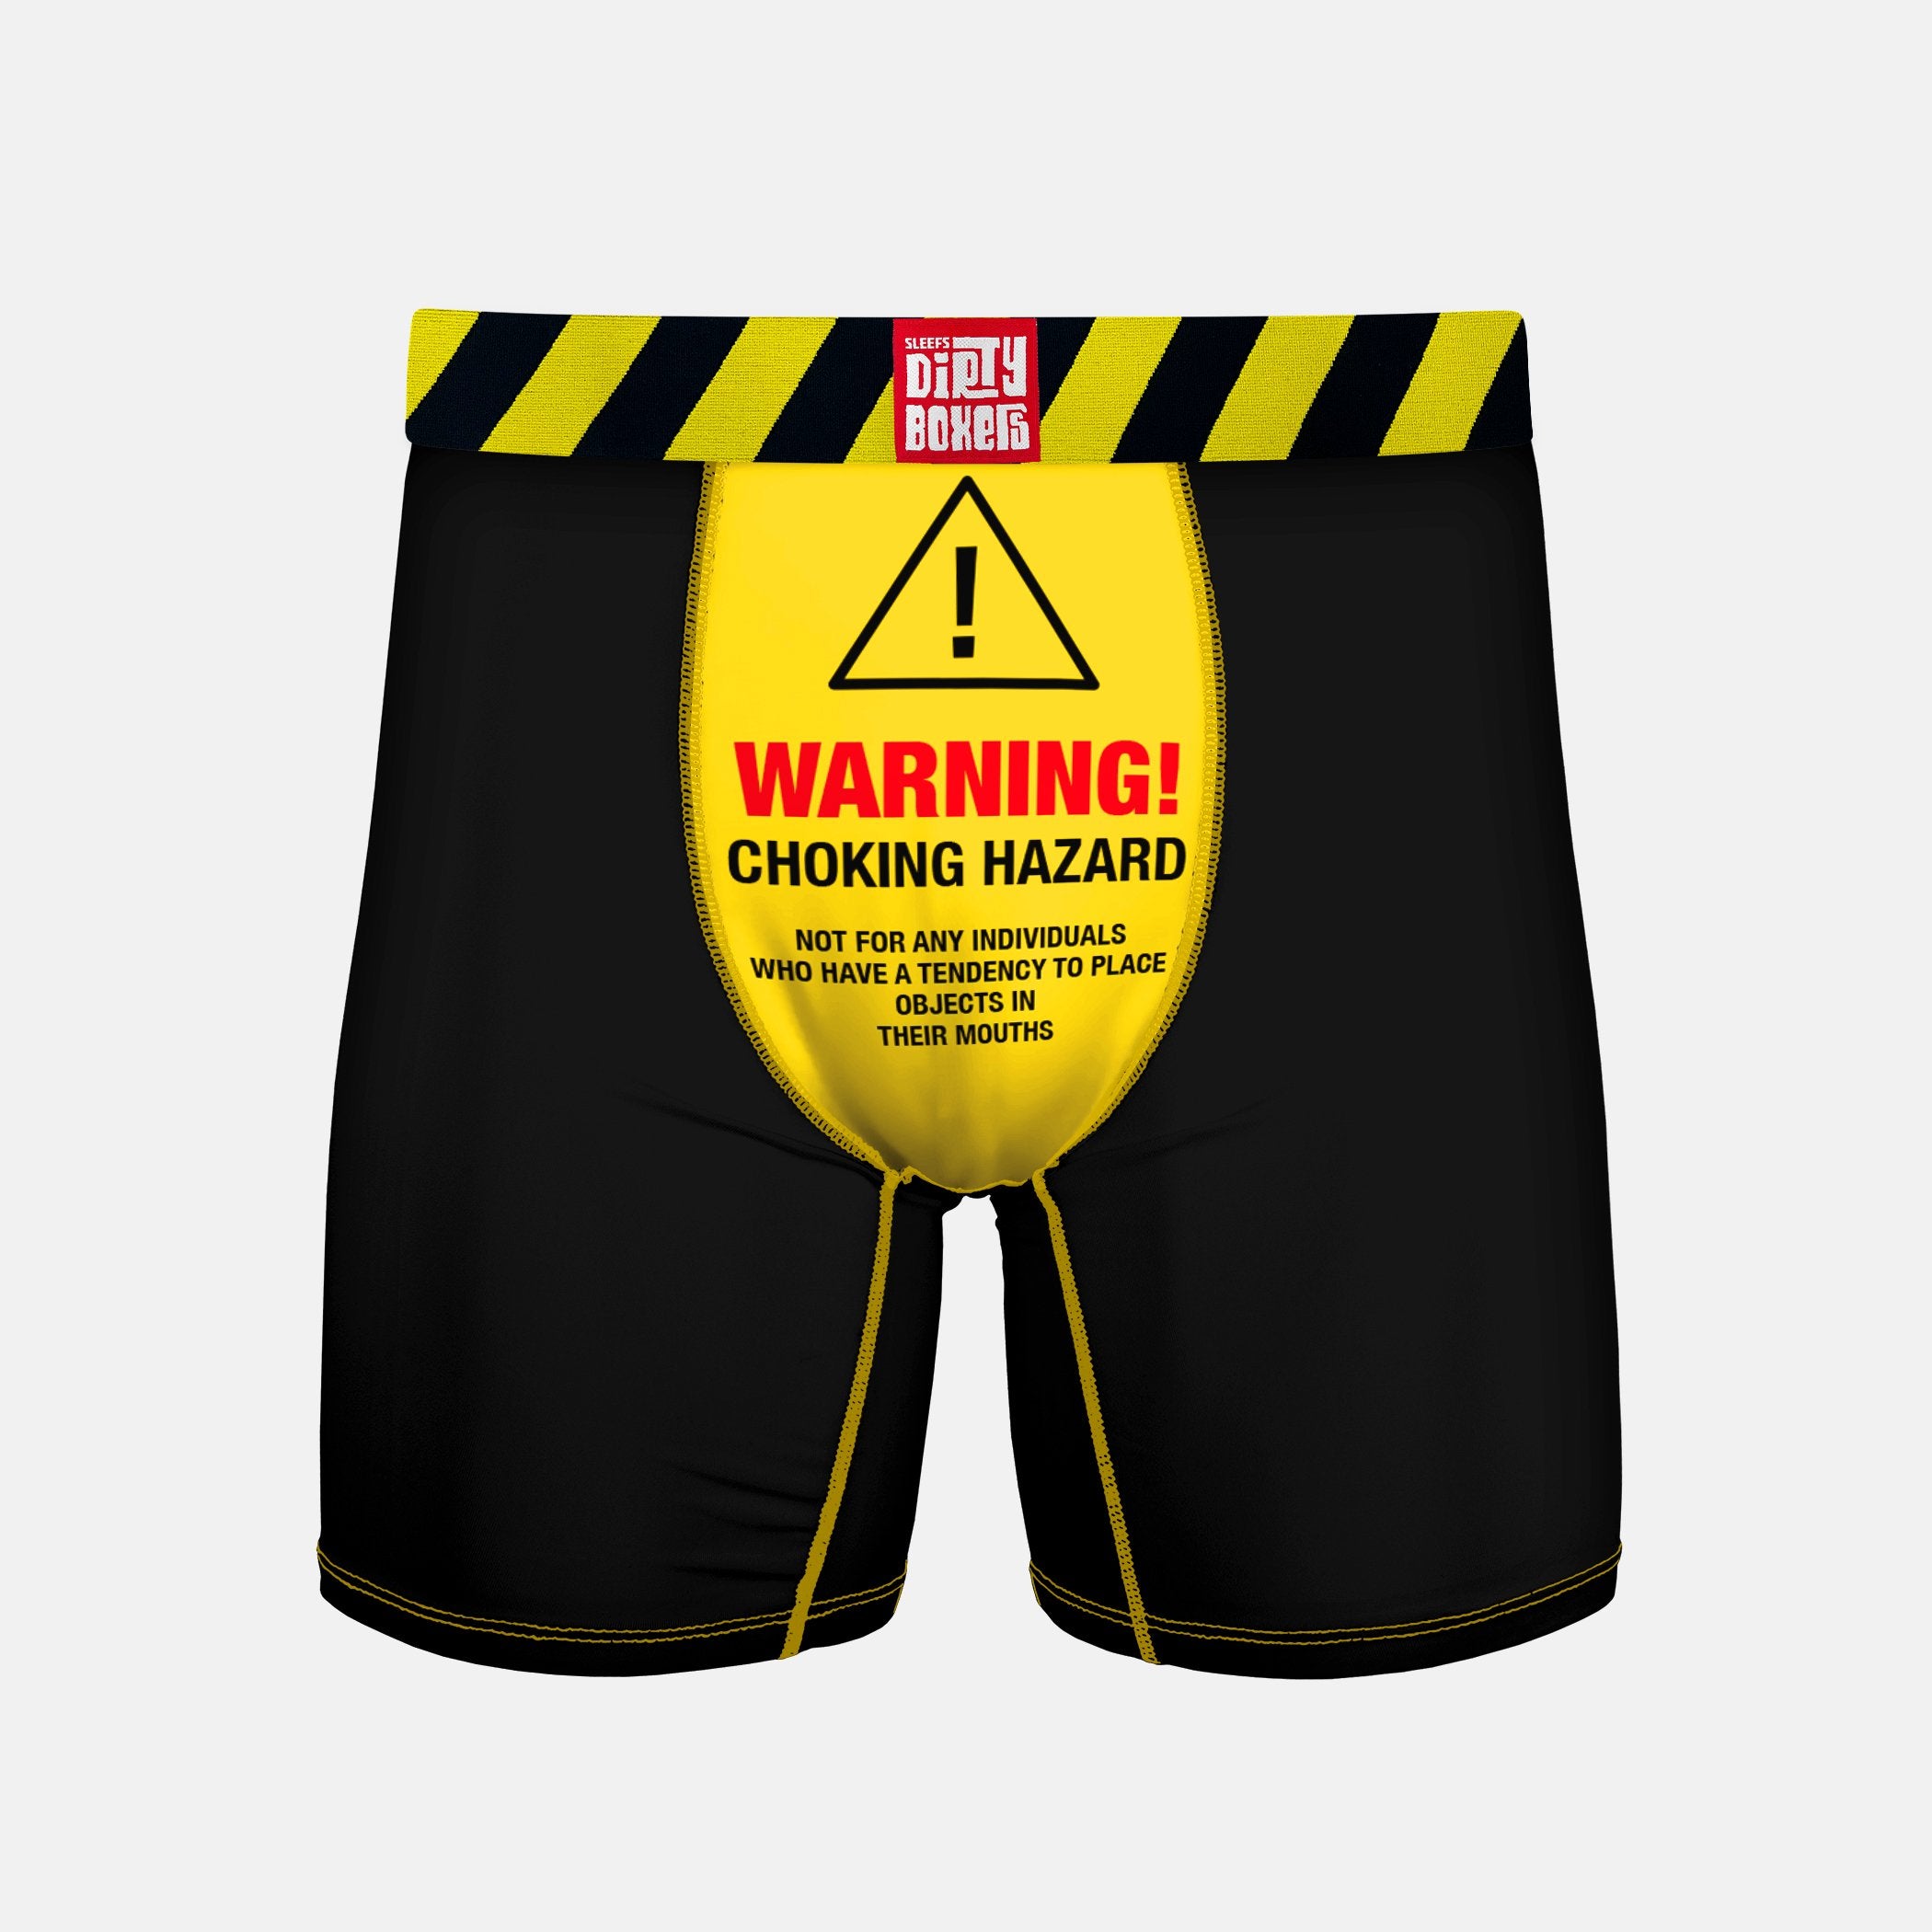 Dirty Boxers funny novelty men's briefs – SLEEFS